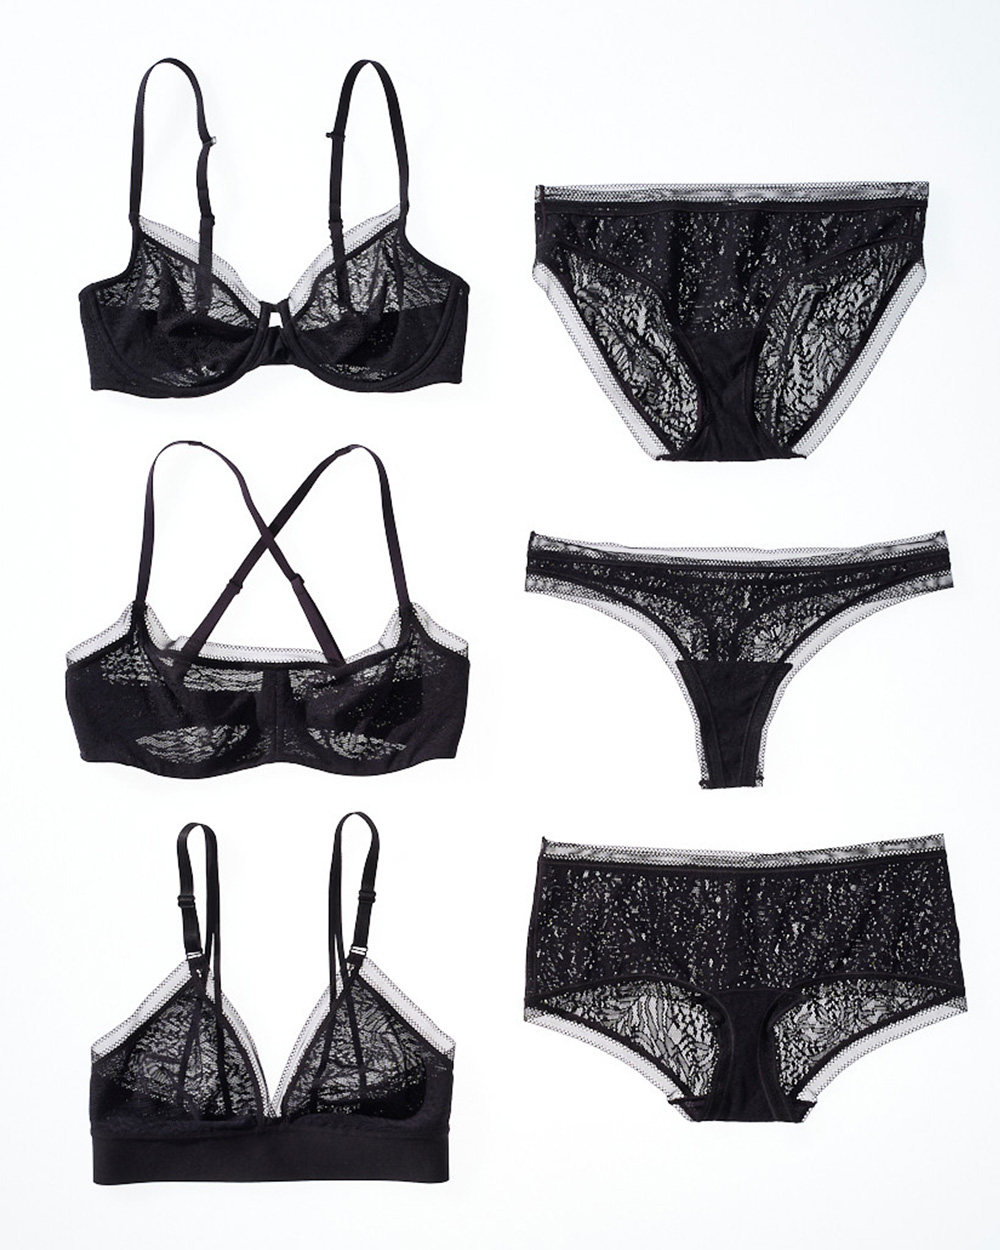 Soma<sup class=st-superscript>®</sup> laydown of black unlined bras and panties.